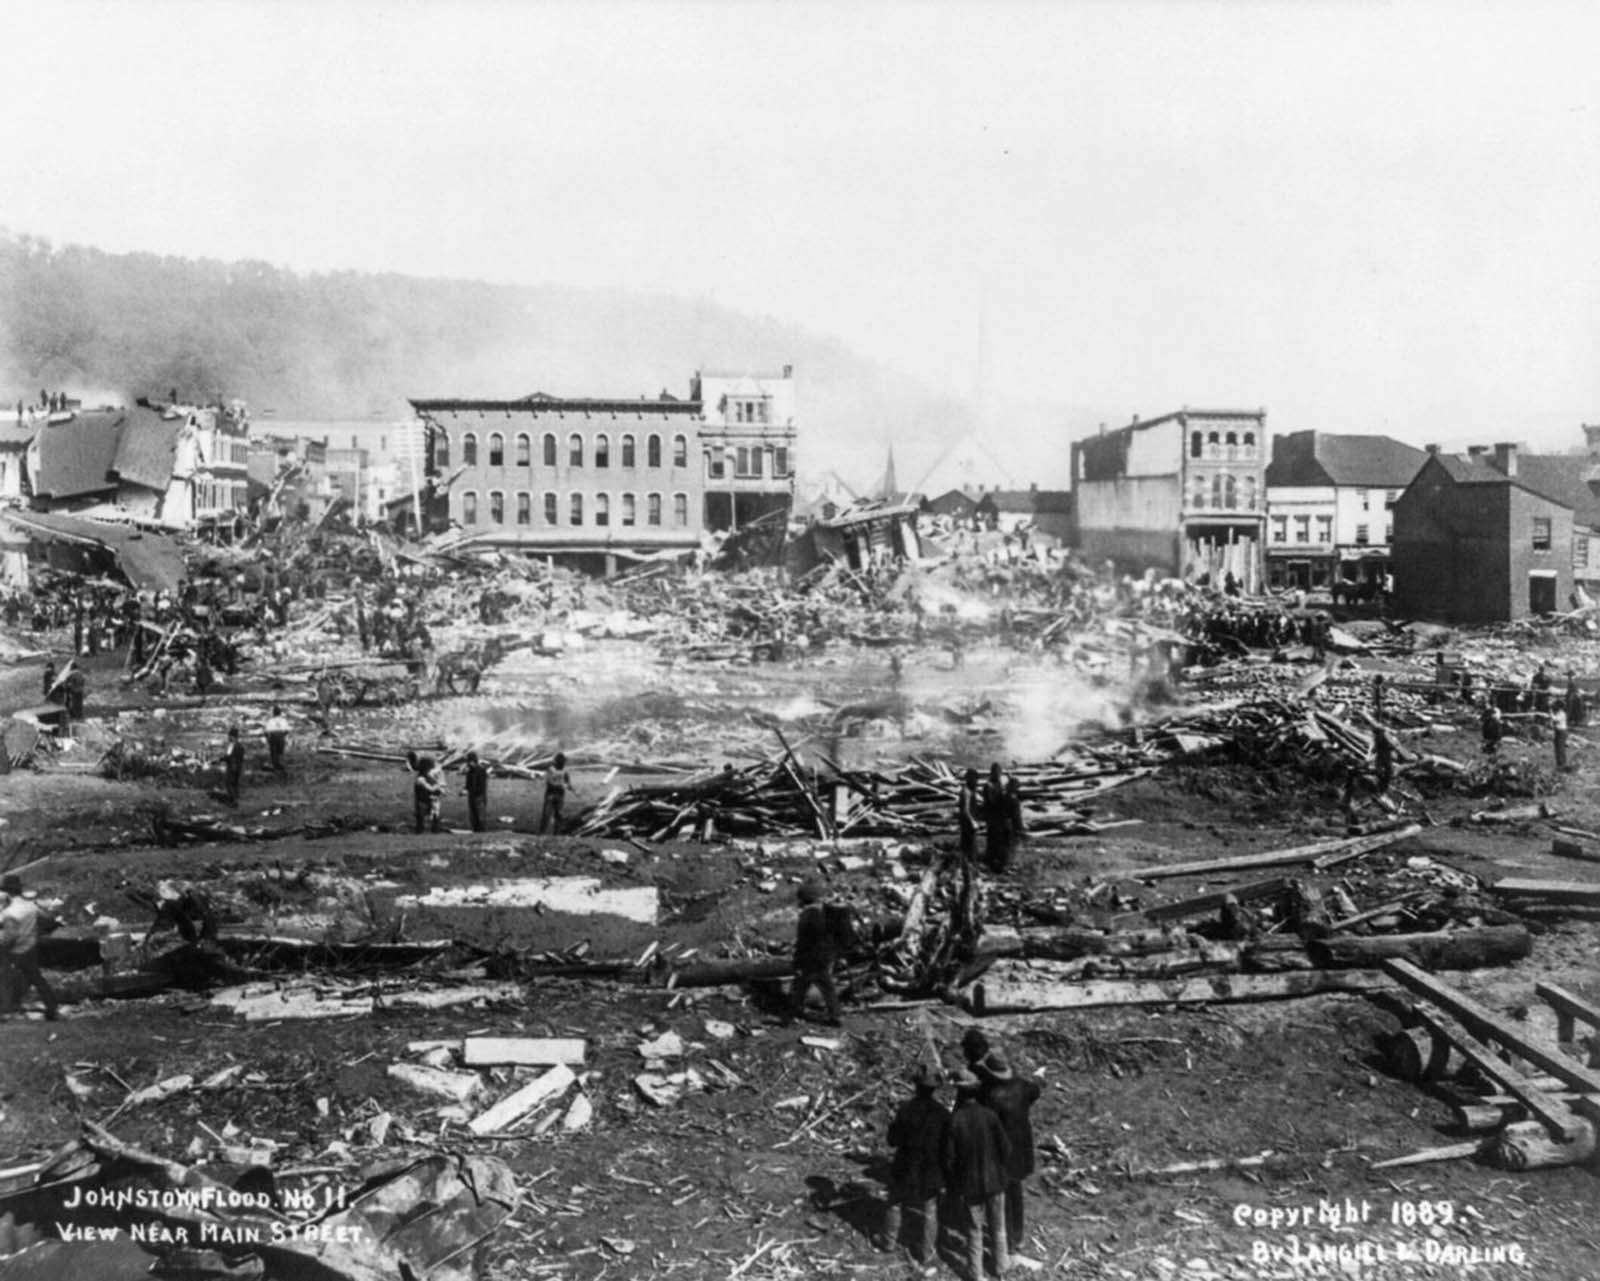 The American Red Cross, led by Clara Barton and with 50 volunteers, undertook a major disaster relief effort.